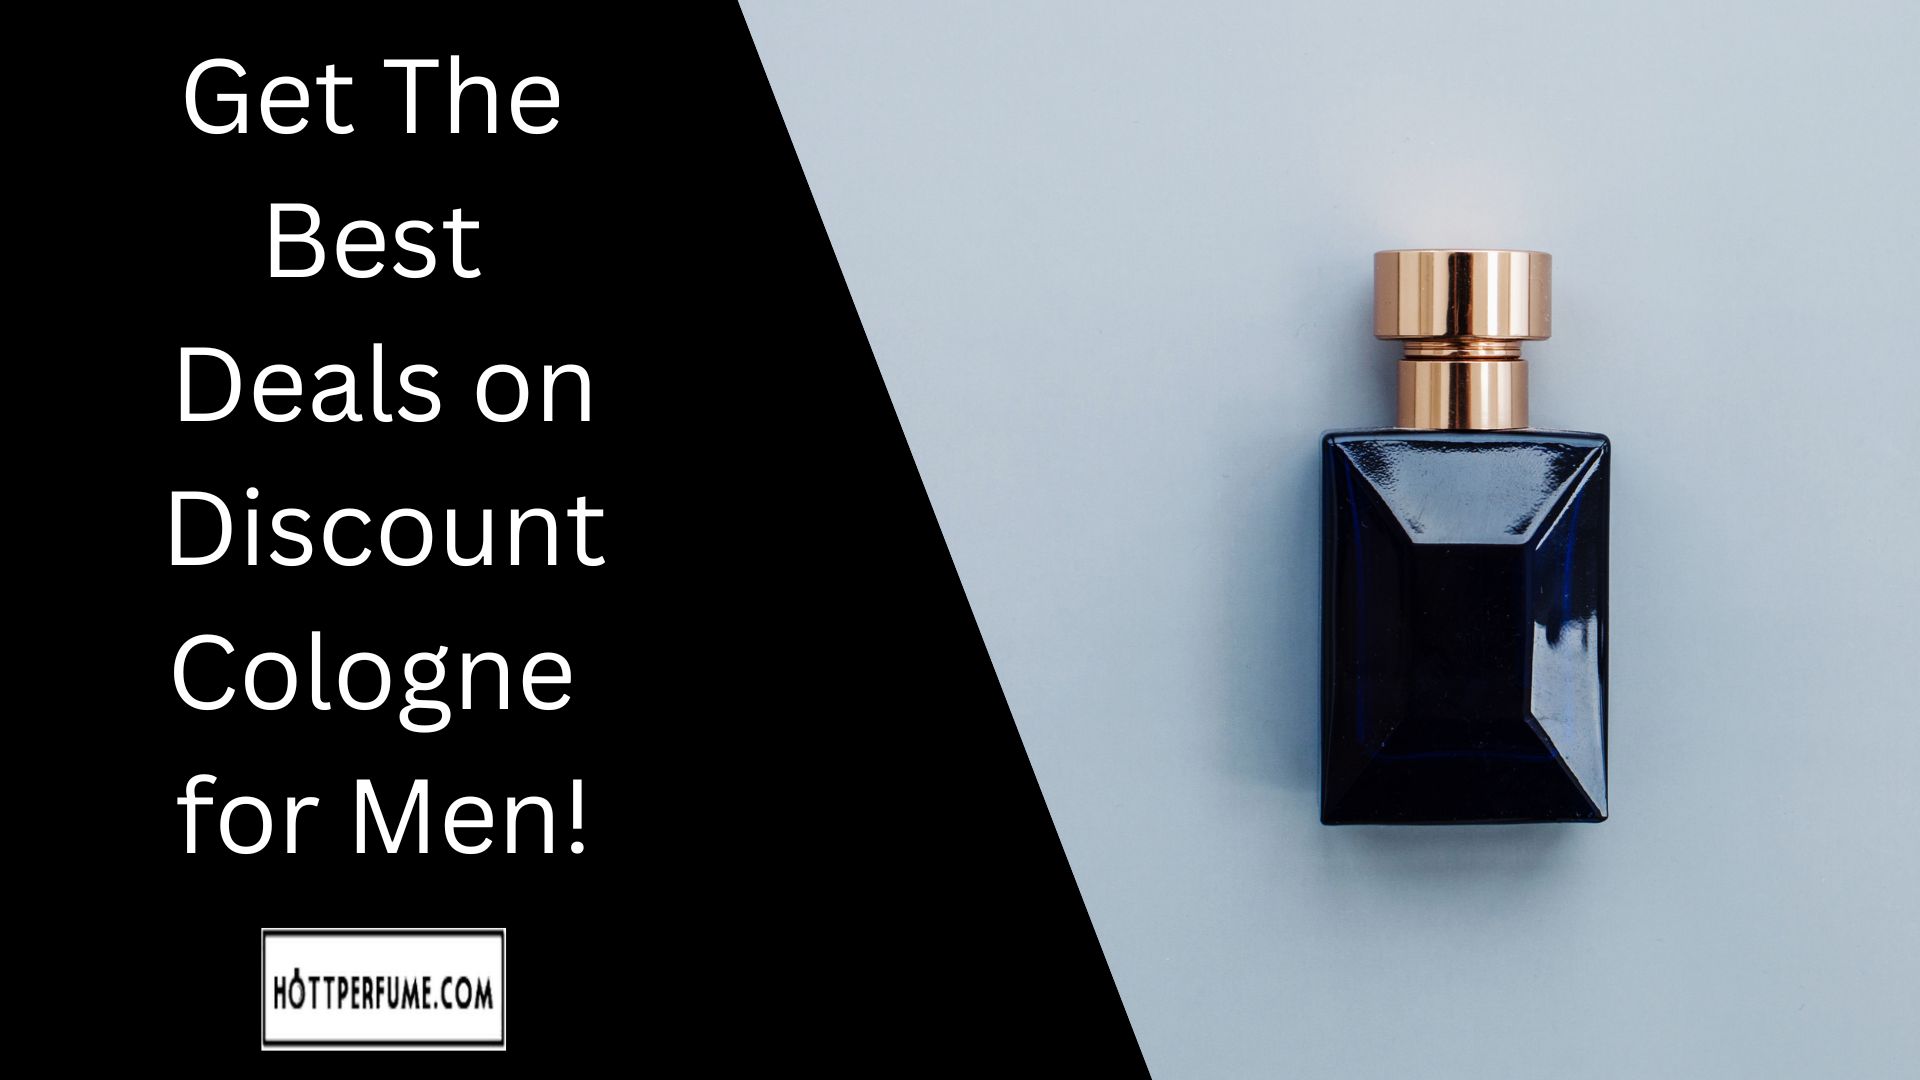 Get The Best Deals on Discount Cologne for Men